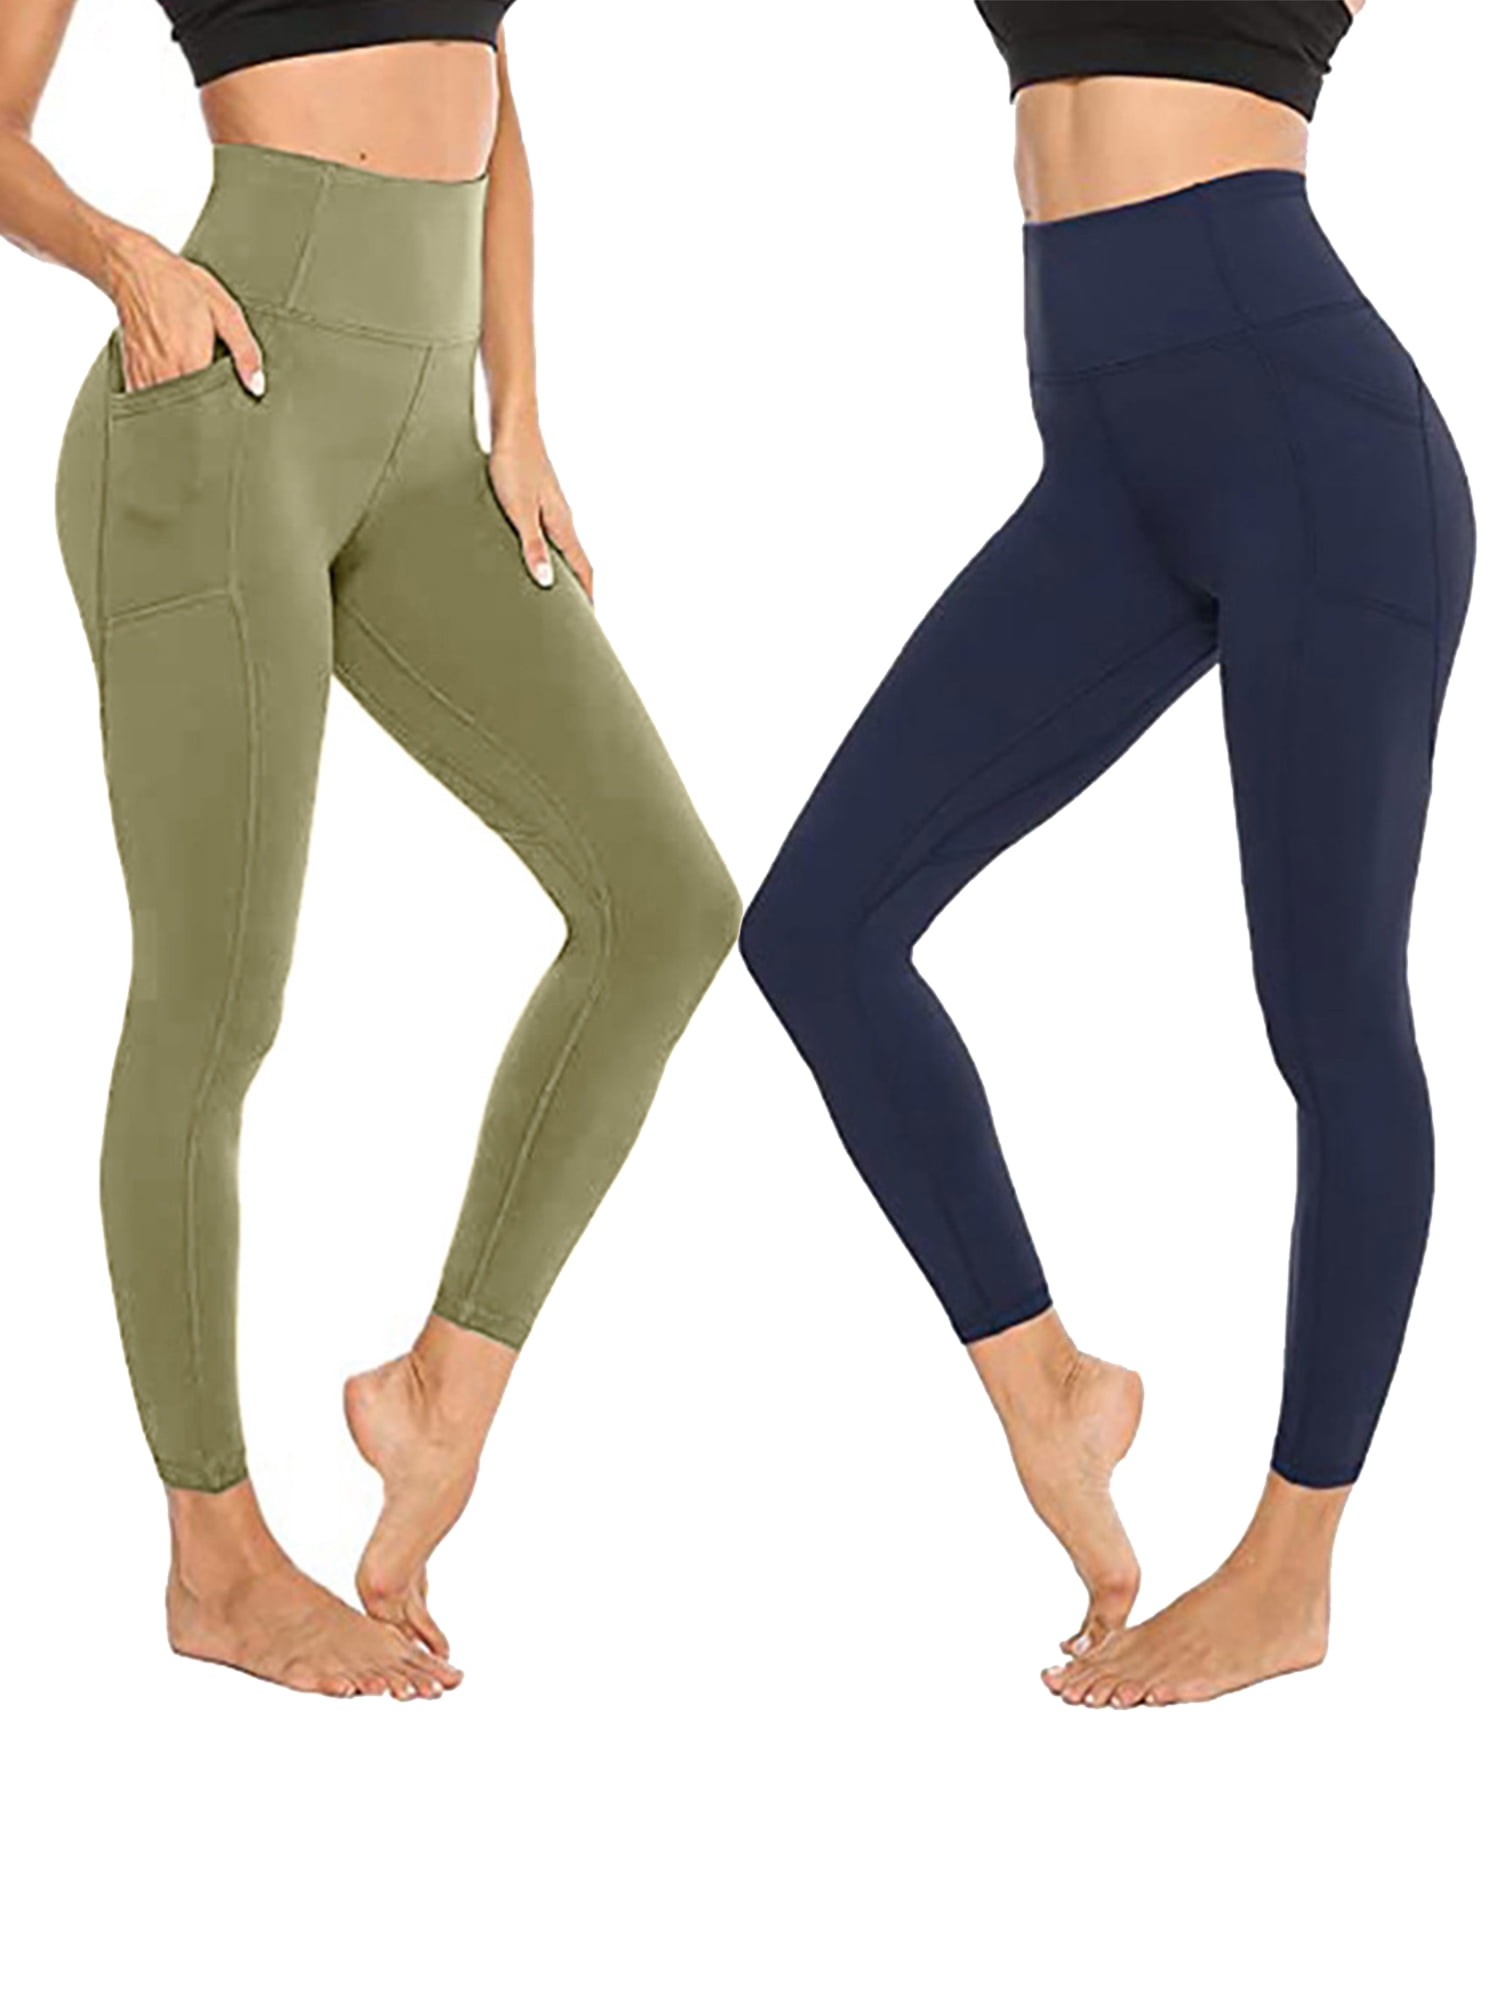 Women's Pockets Leggings High Waisted Yoga Pants Slim Fit Gym Running Trousers 